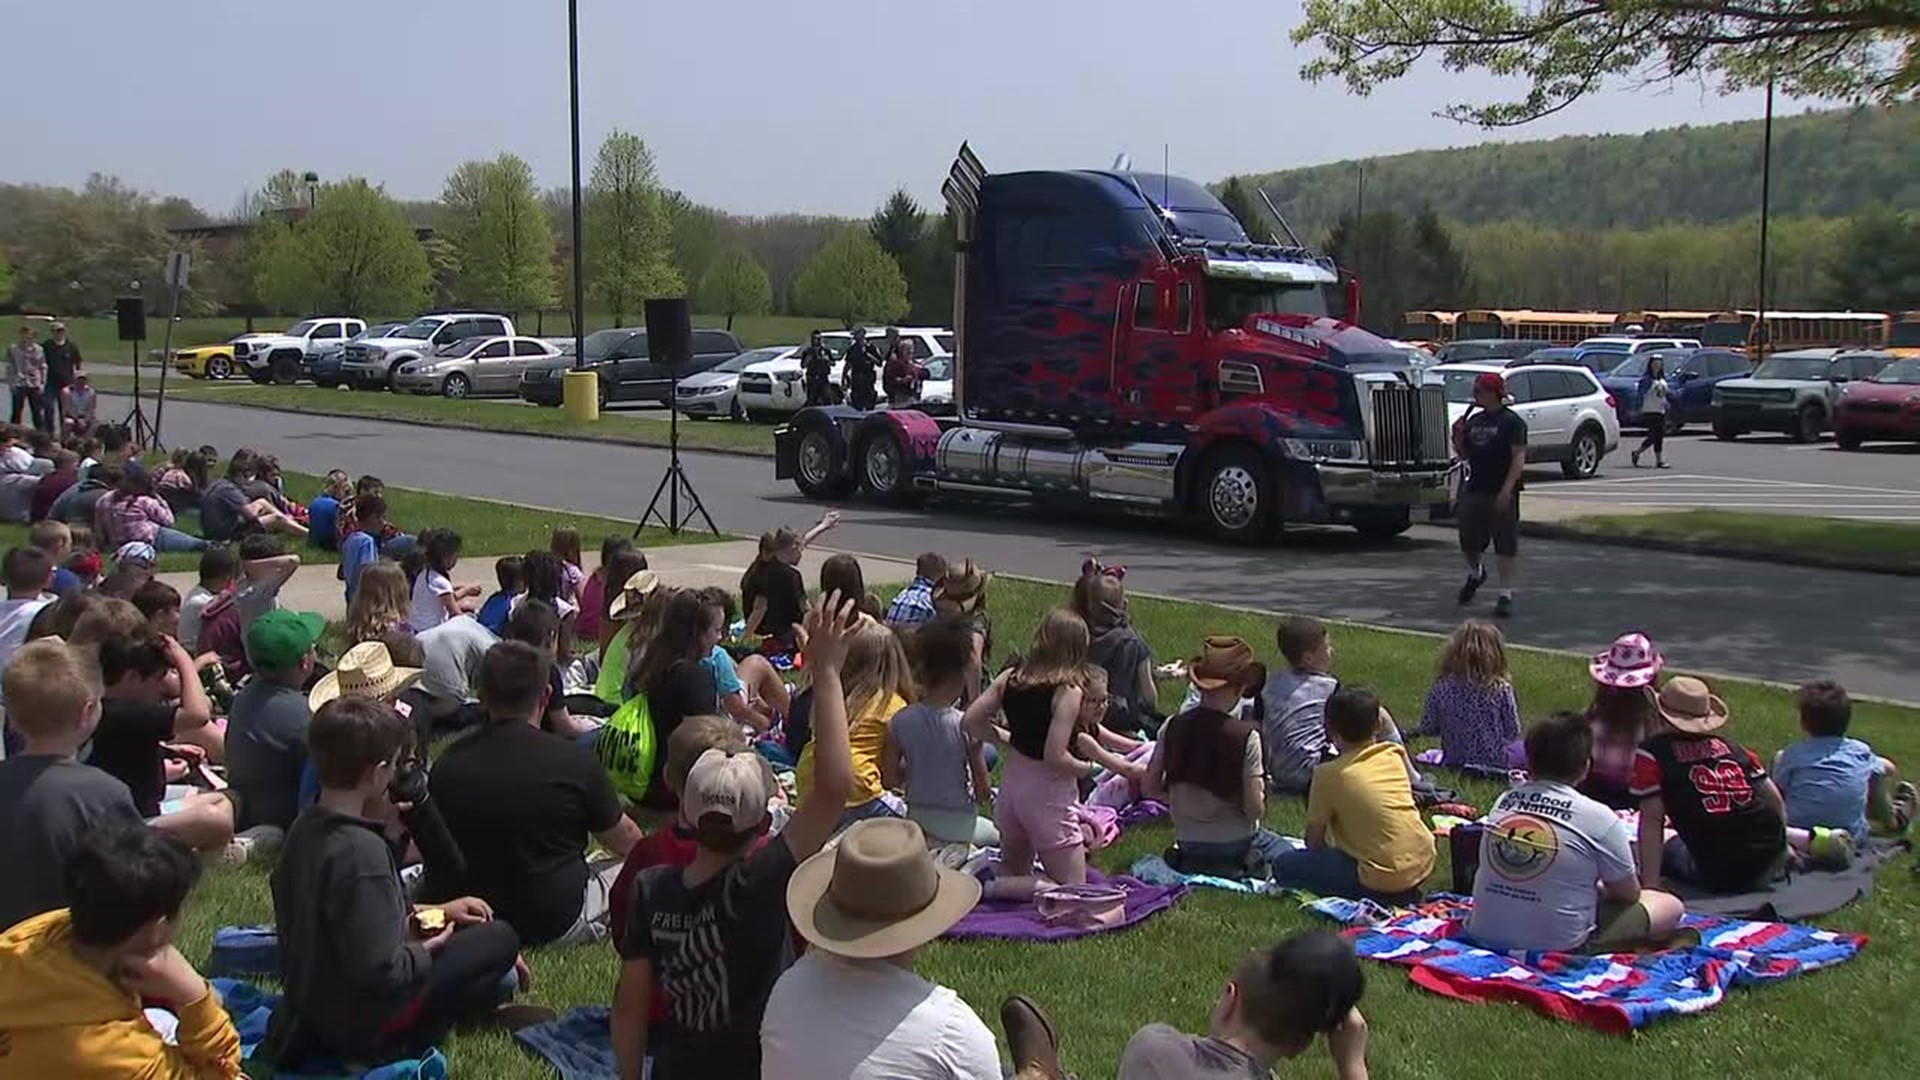 Teachers say having Optimus Prime share a lesson on anti-bullying drove the message home for students.